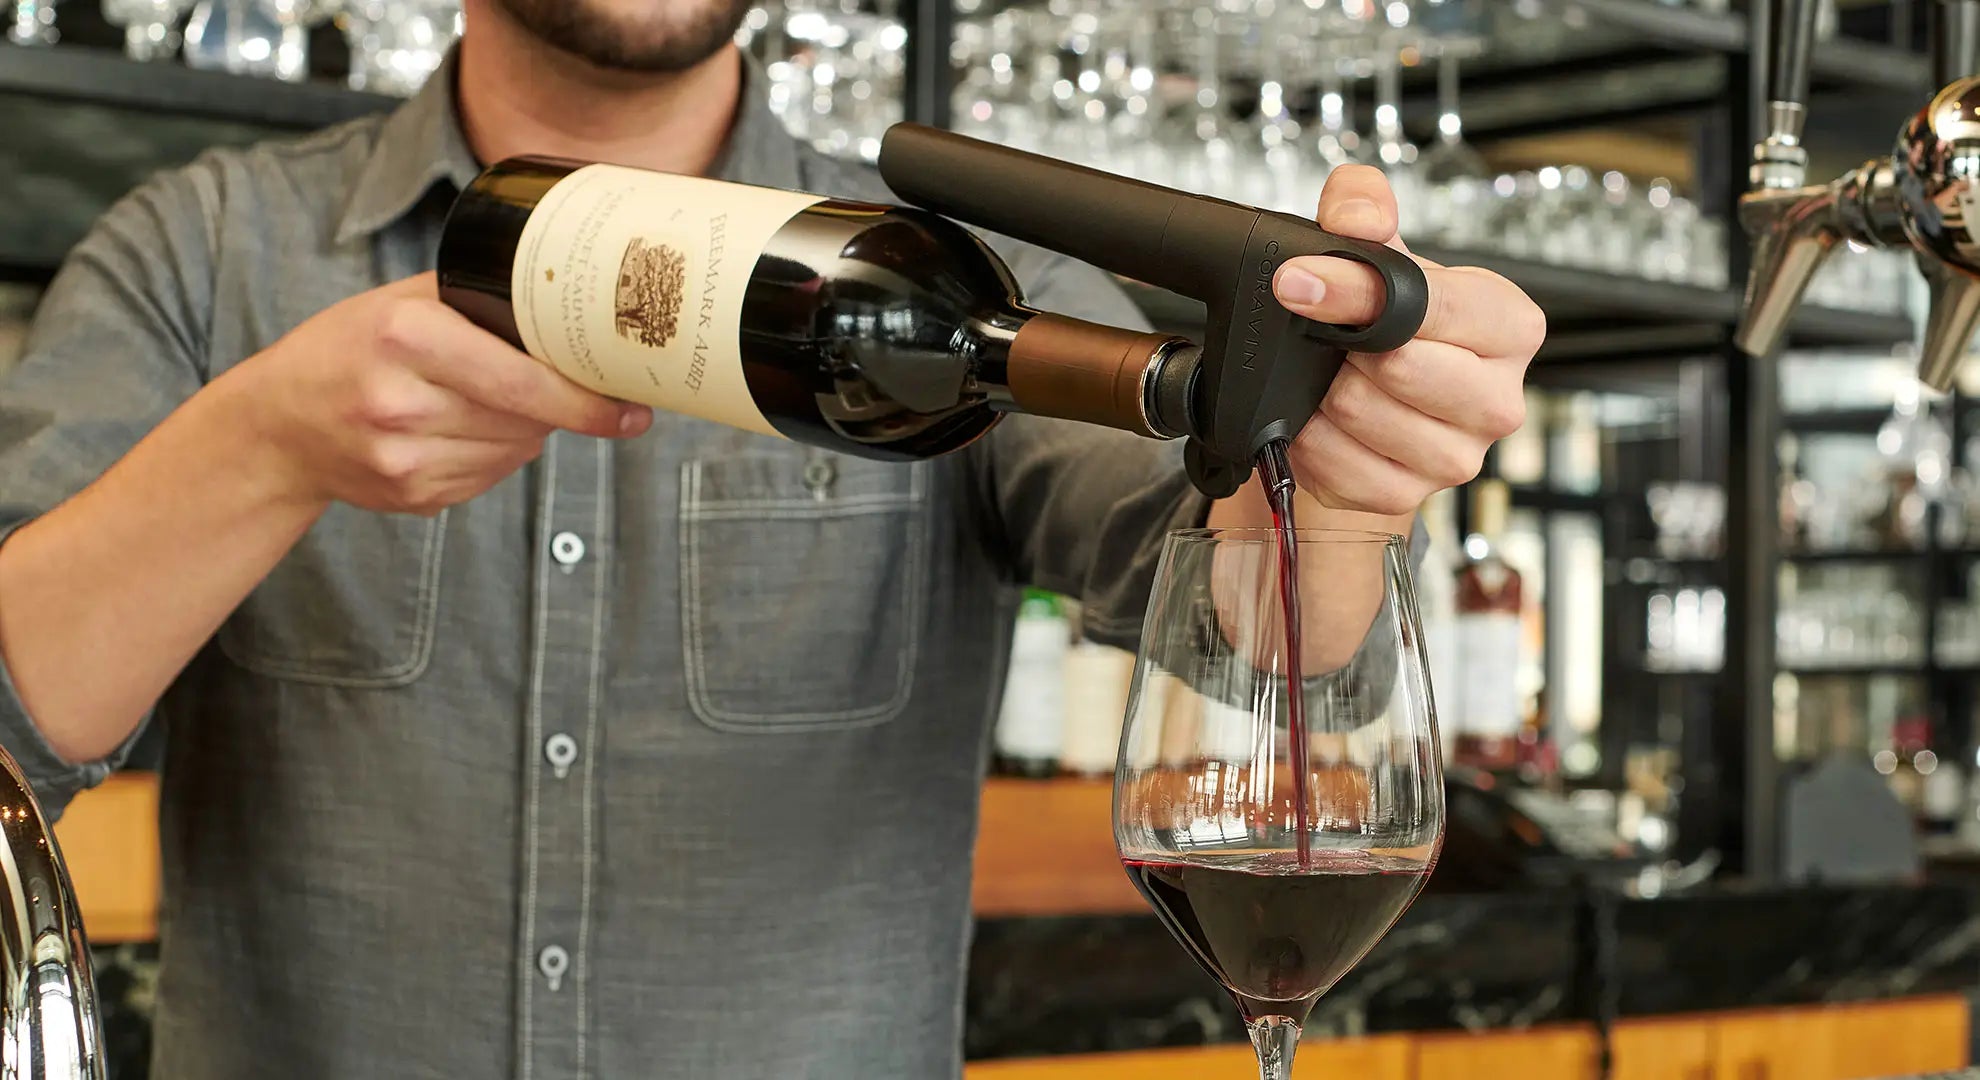 Sample Wines, Preserve Bottles, and Resell Coravin Systems